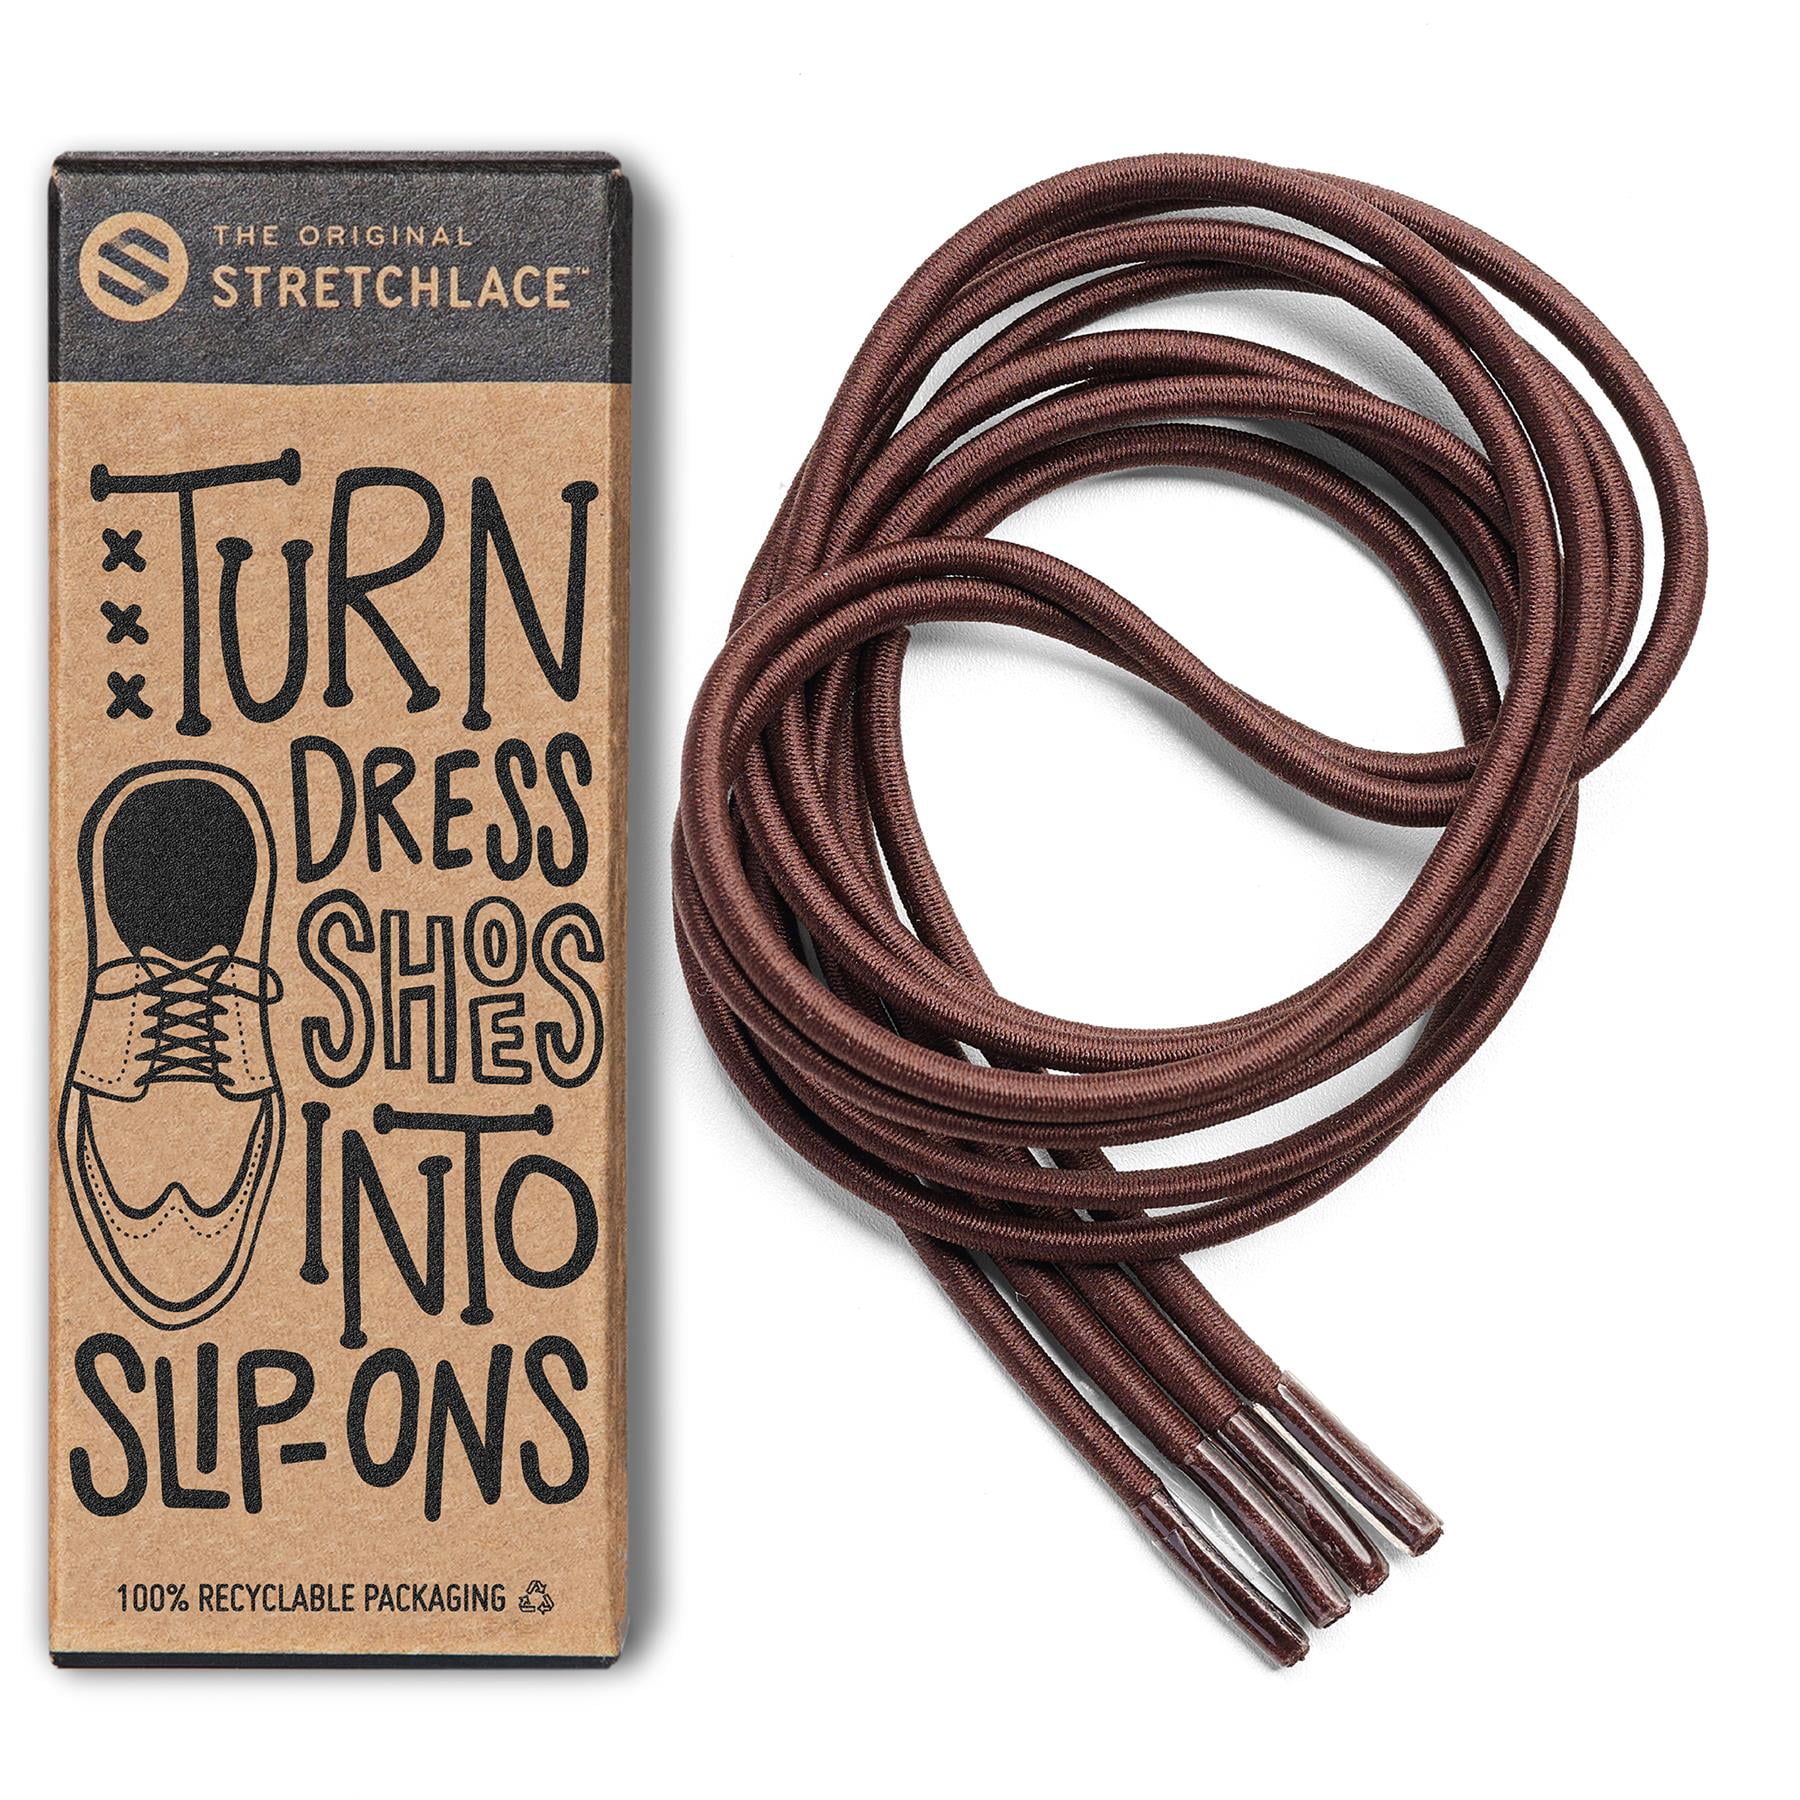 The Original Stretchlace, Round Dress Shoe Laces